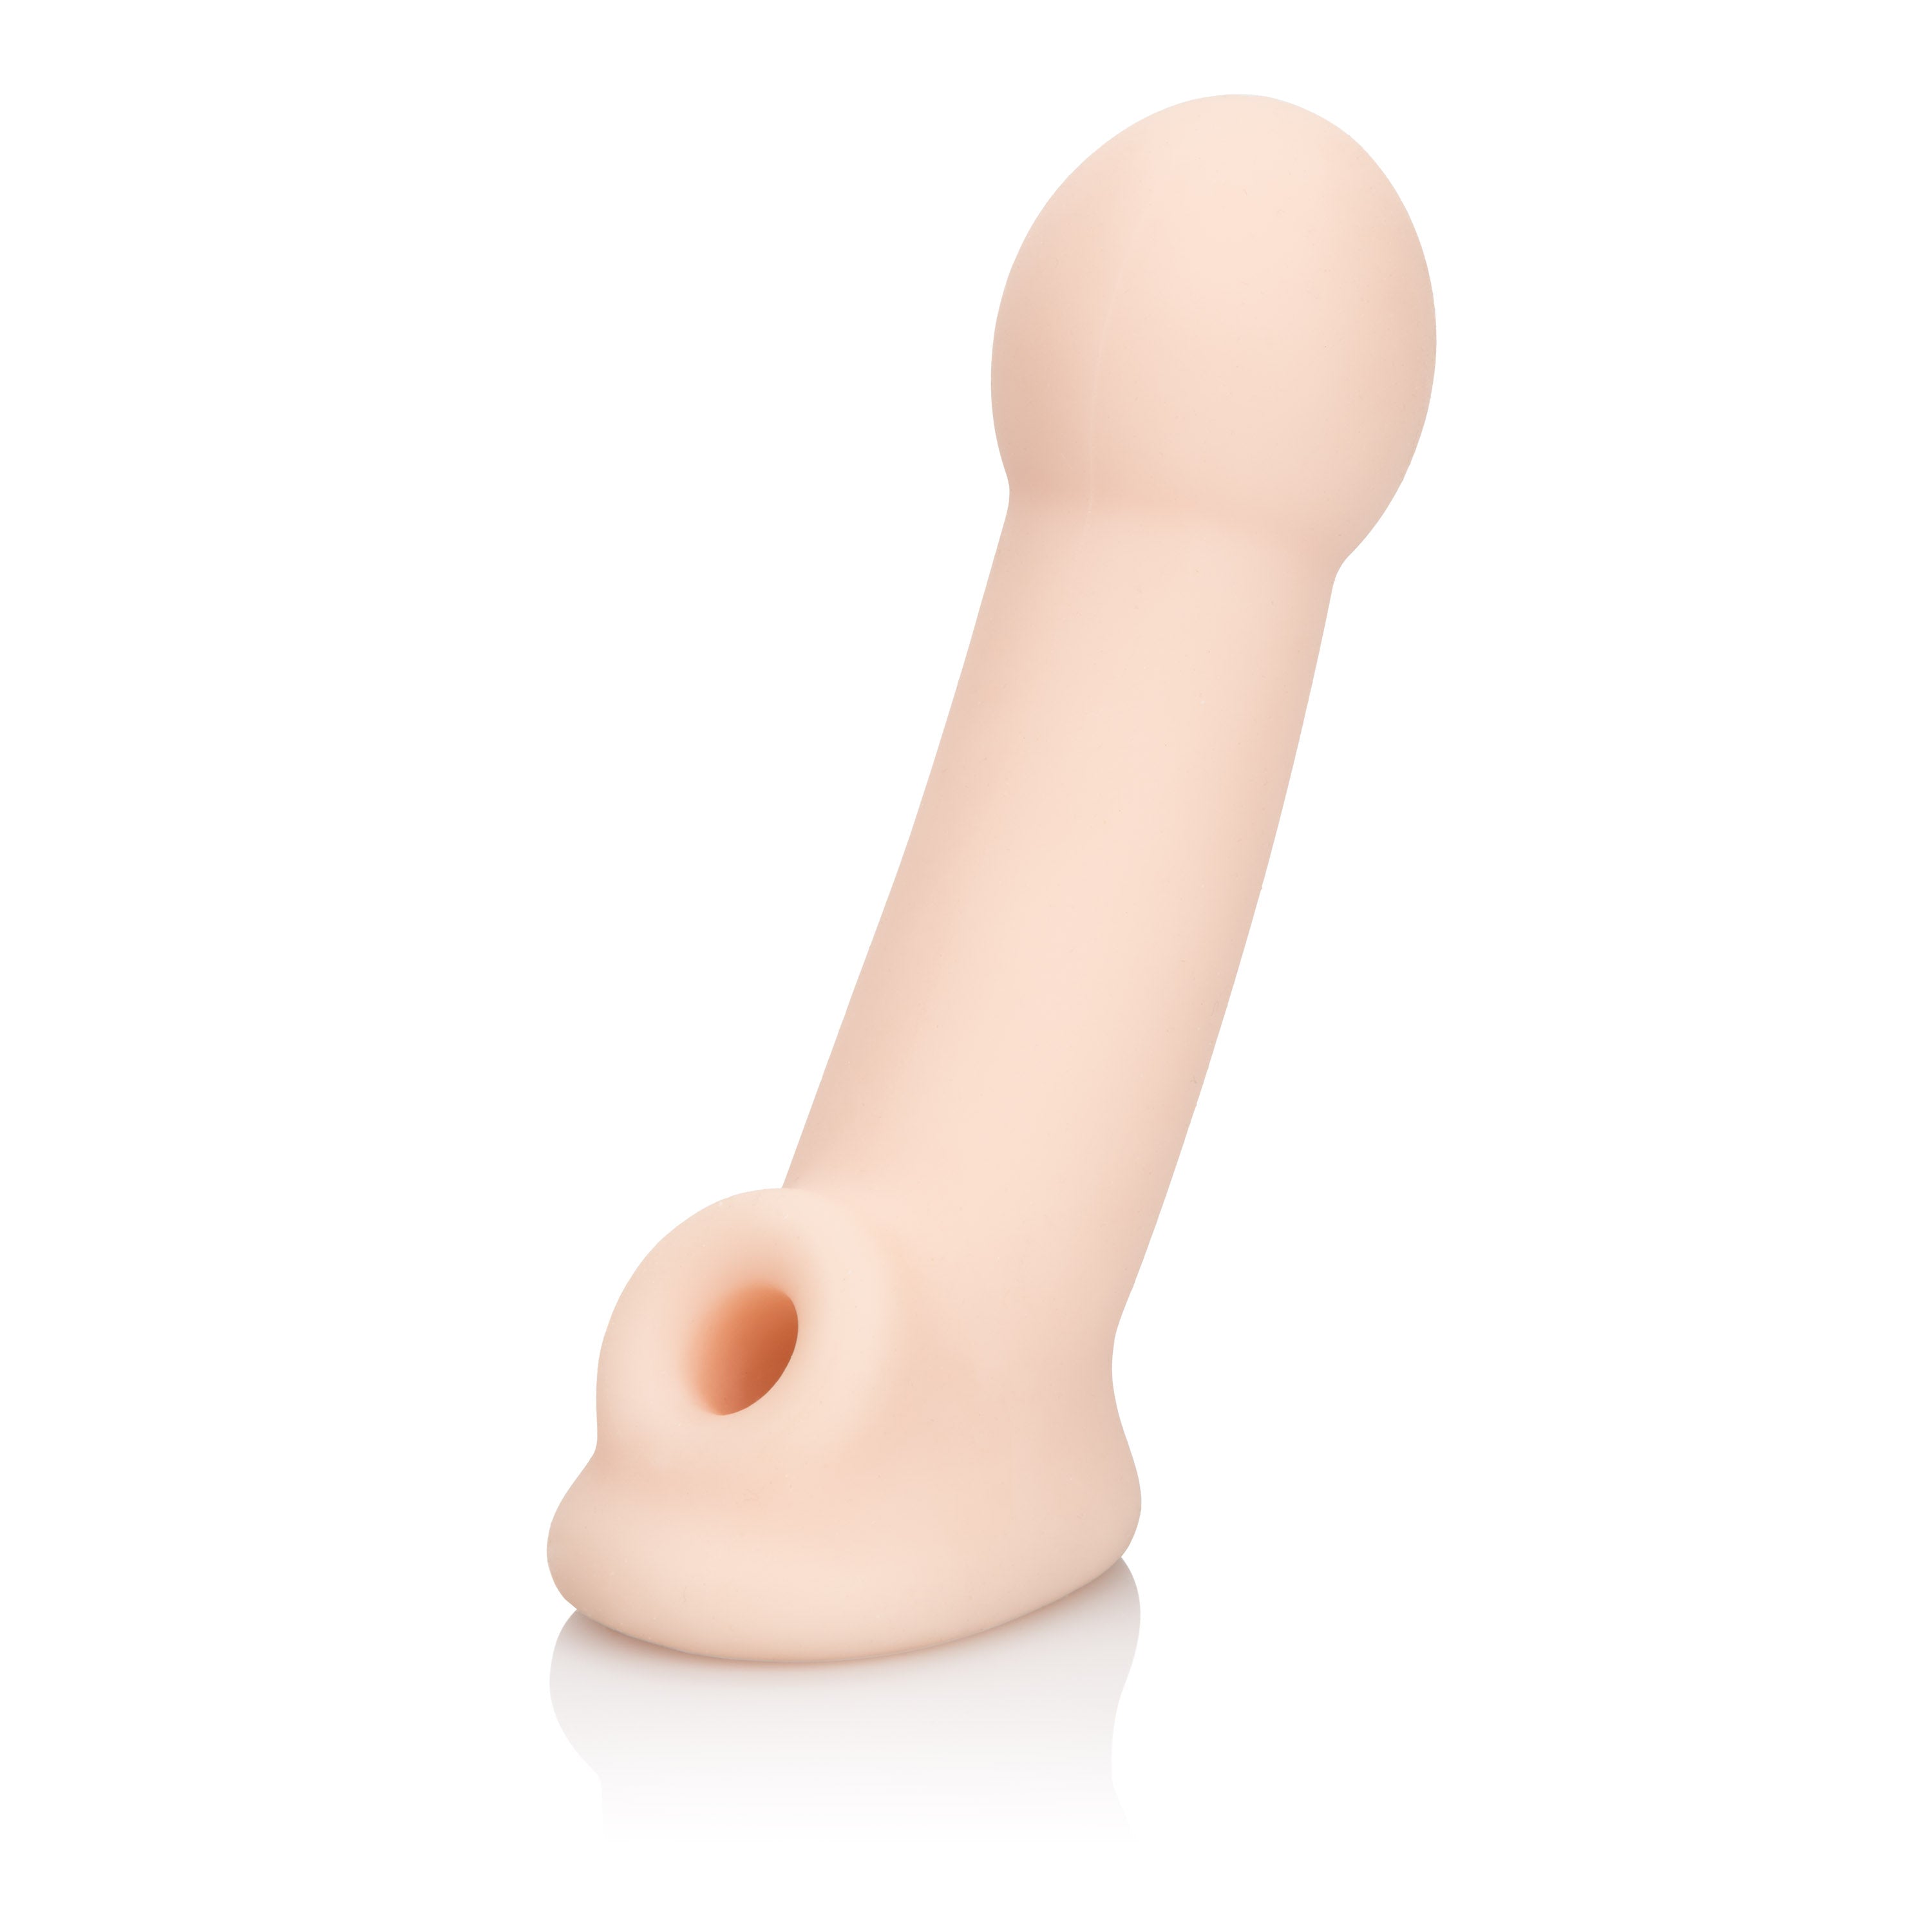 Experience Your Wildest Desires with the Ultimate Extender Penis Sleeve